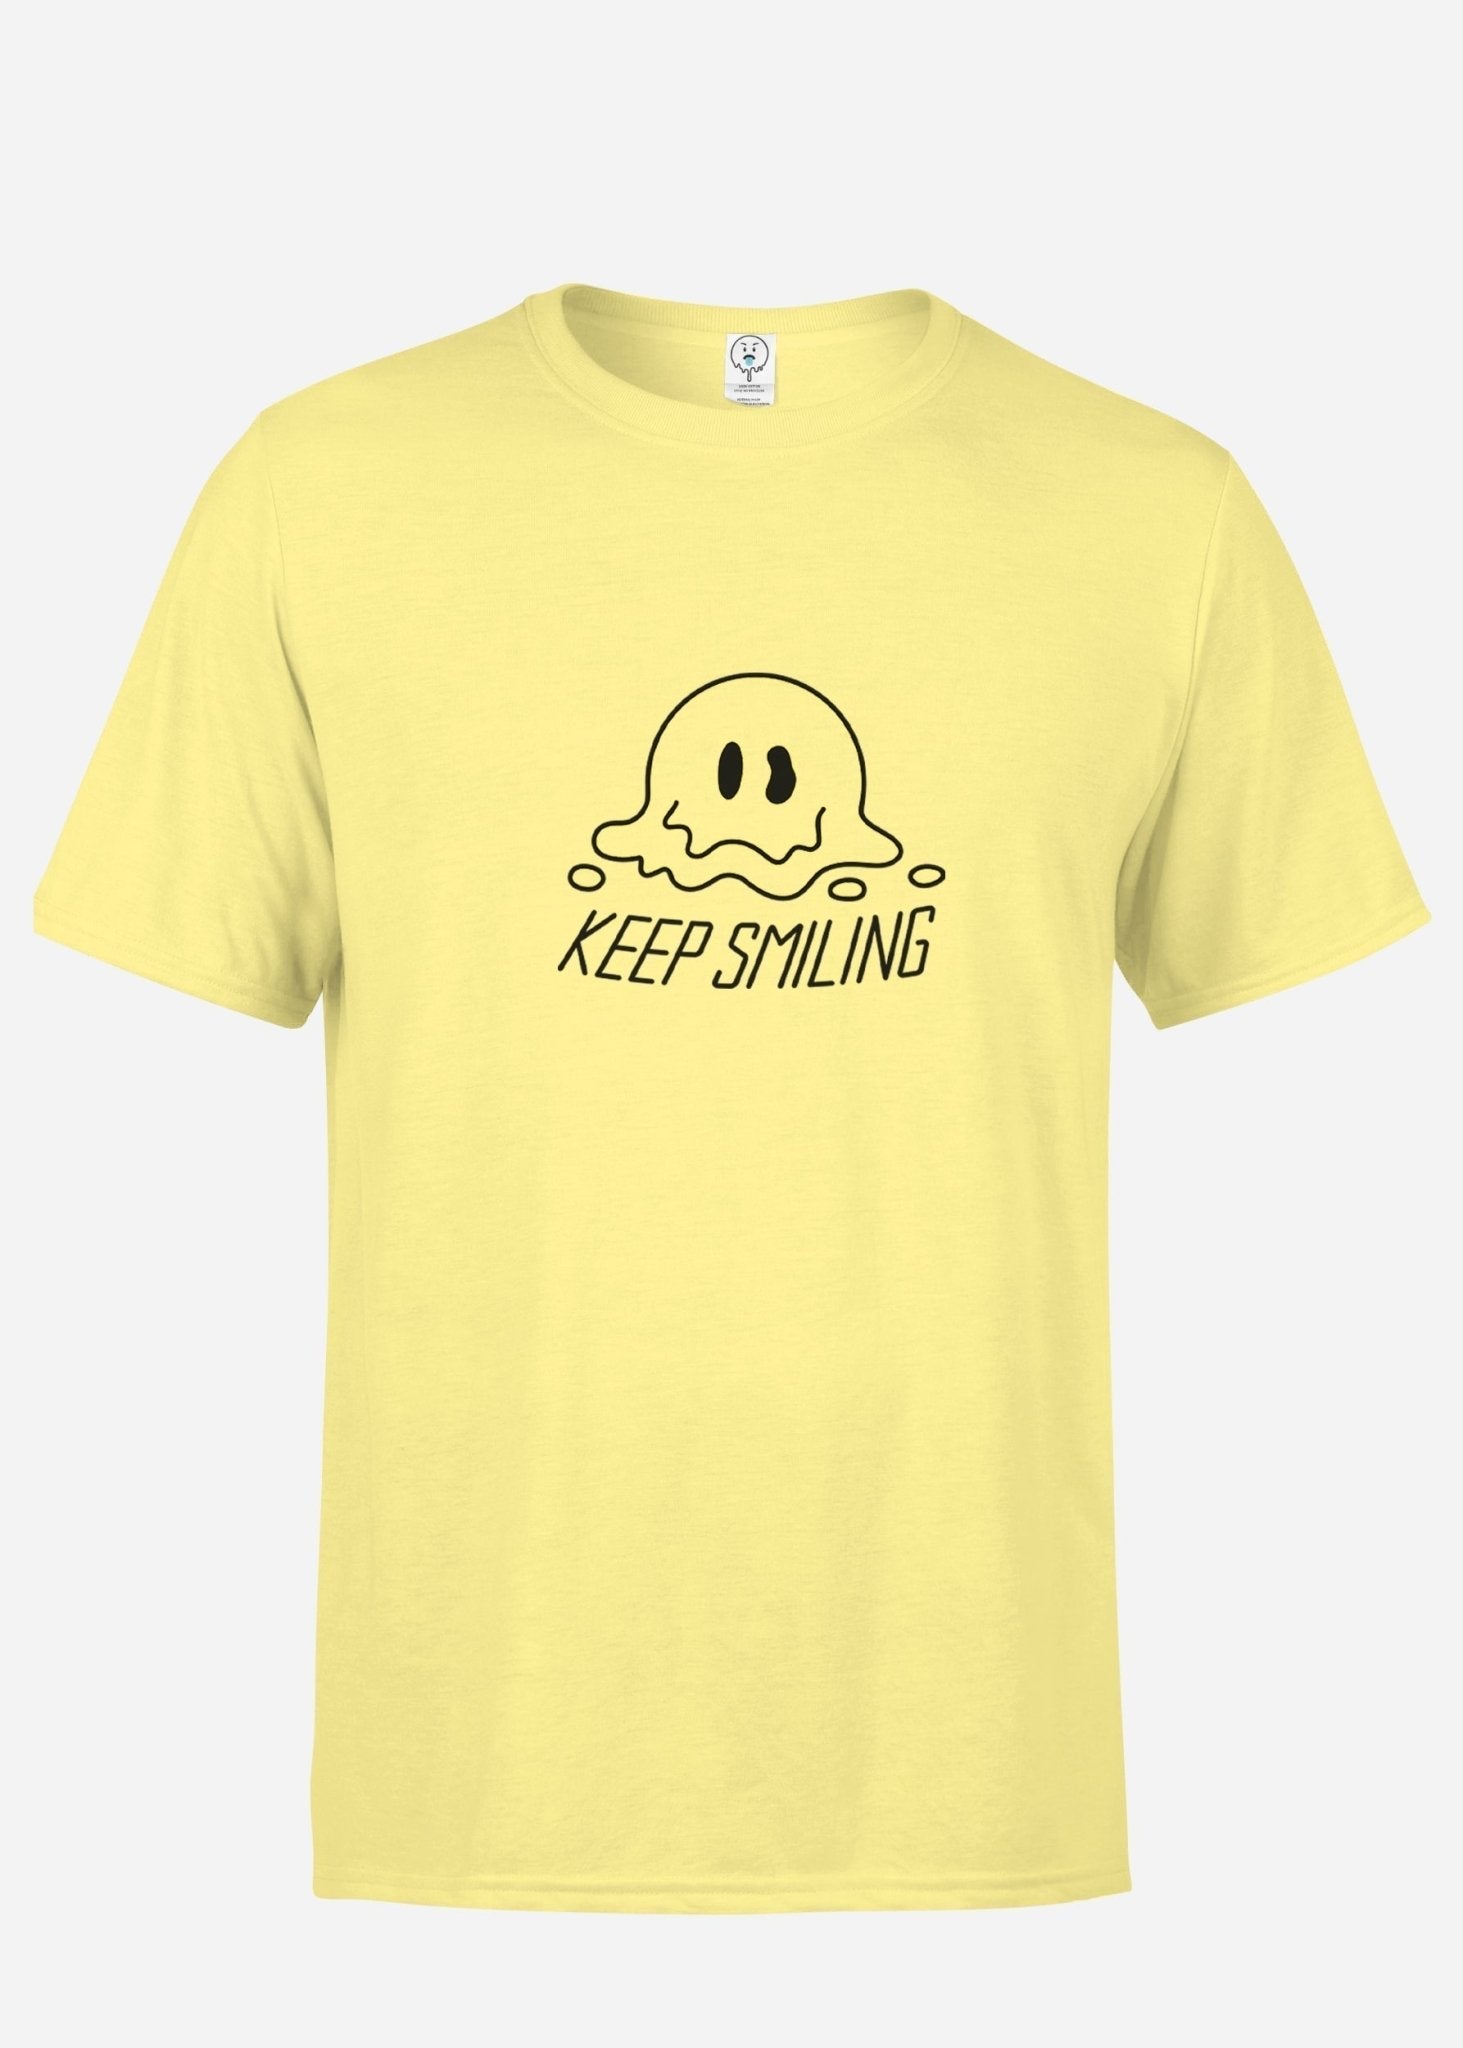 Keep Smiling T-Shirt - In Control Clothing